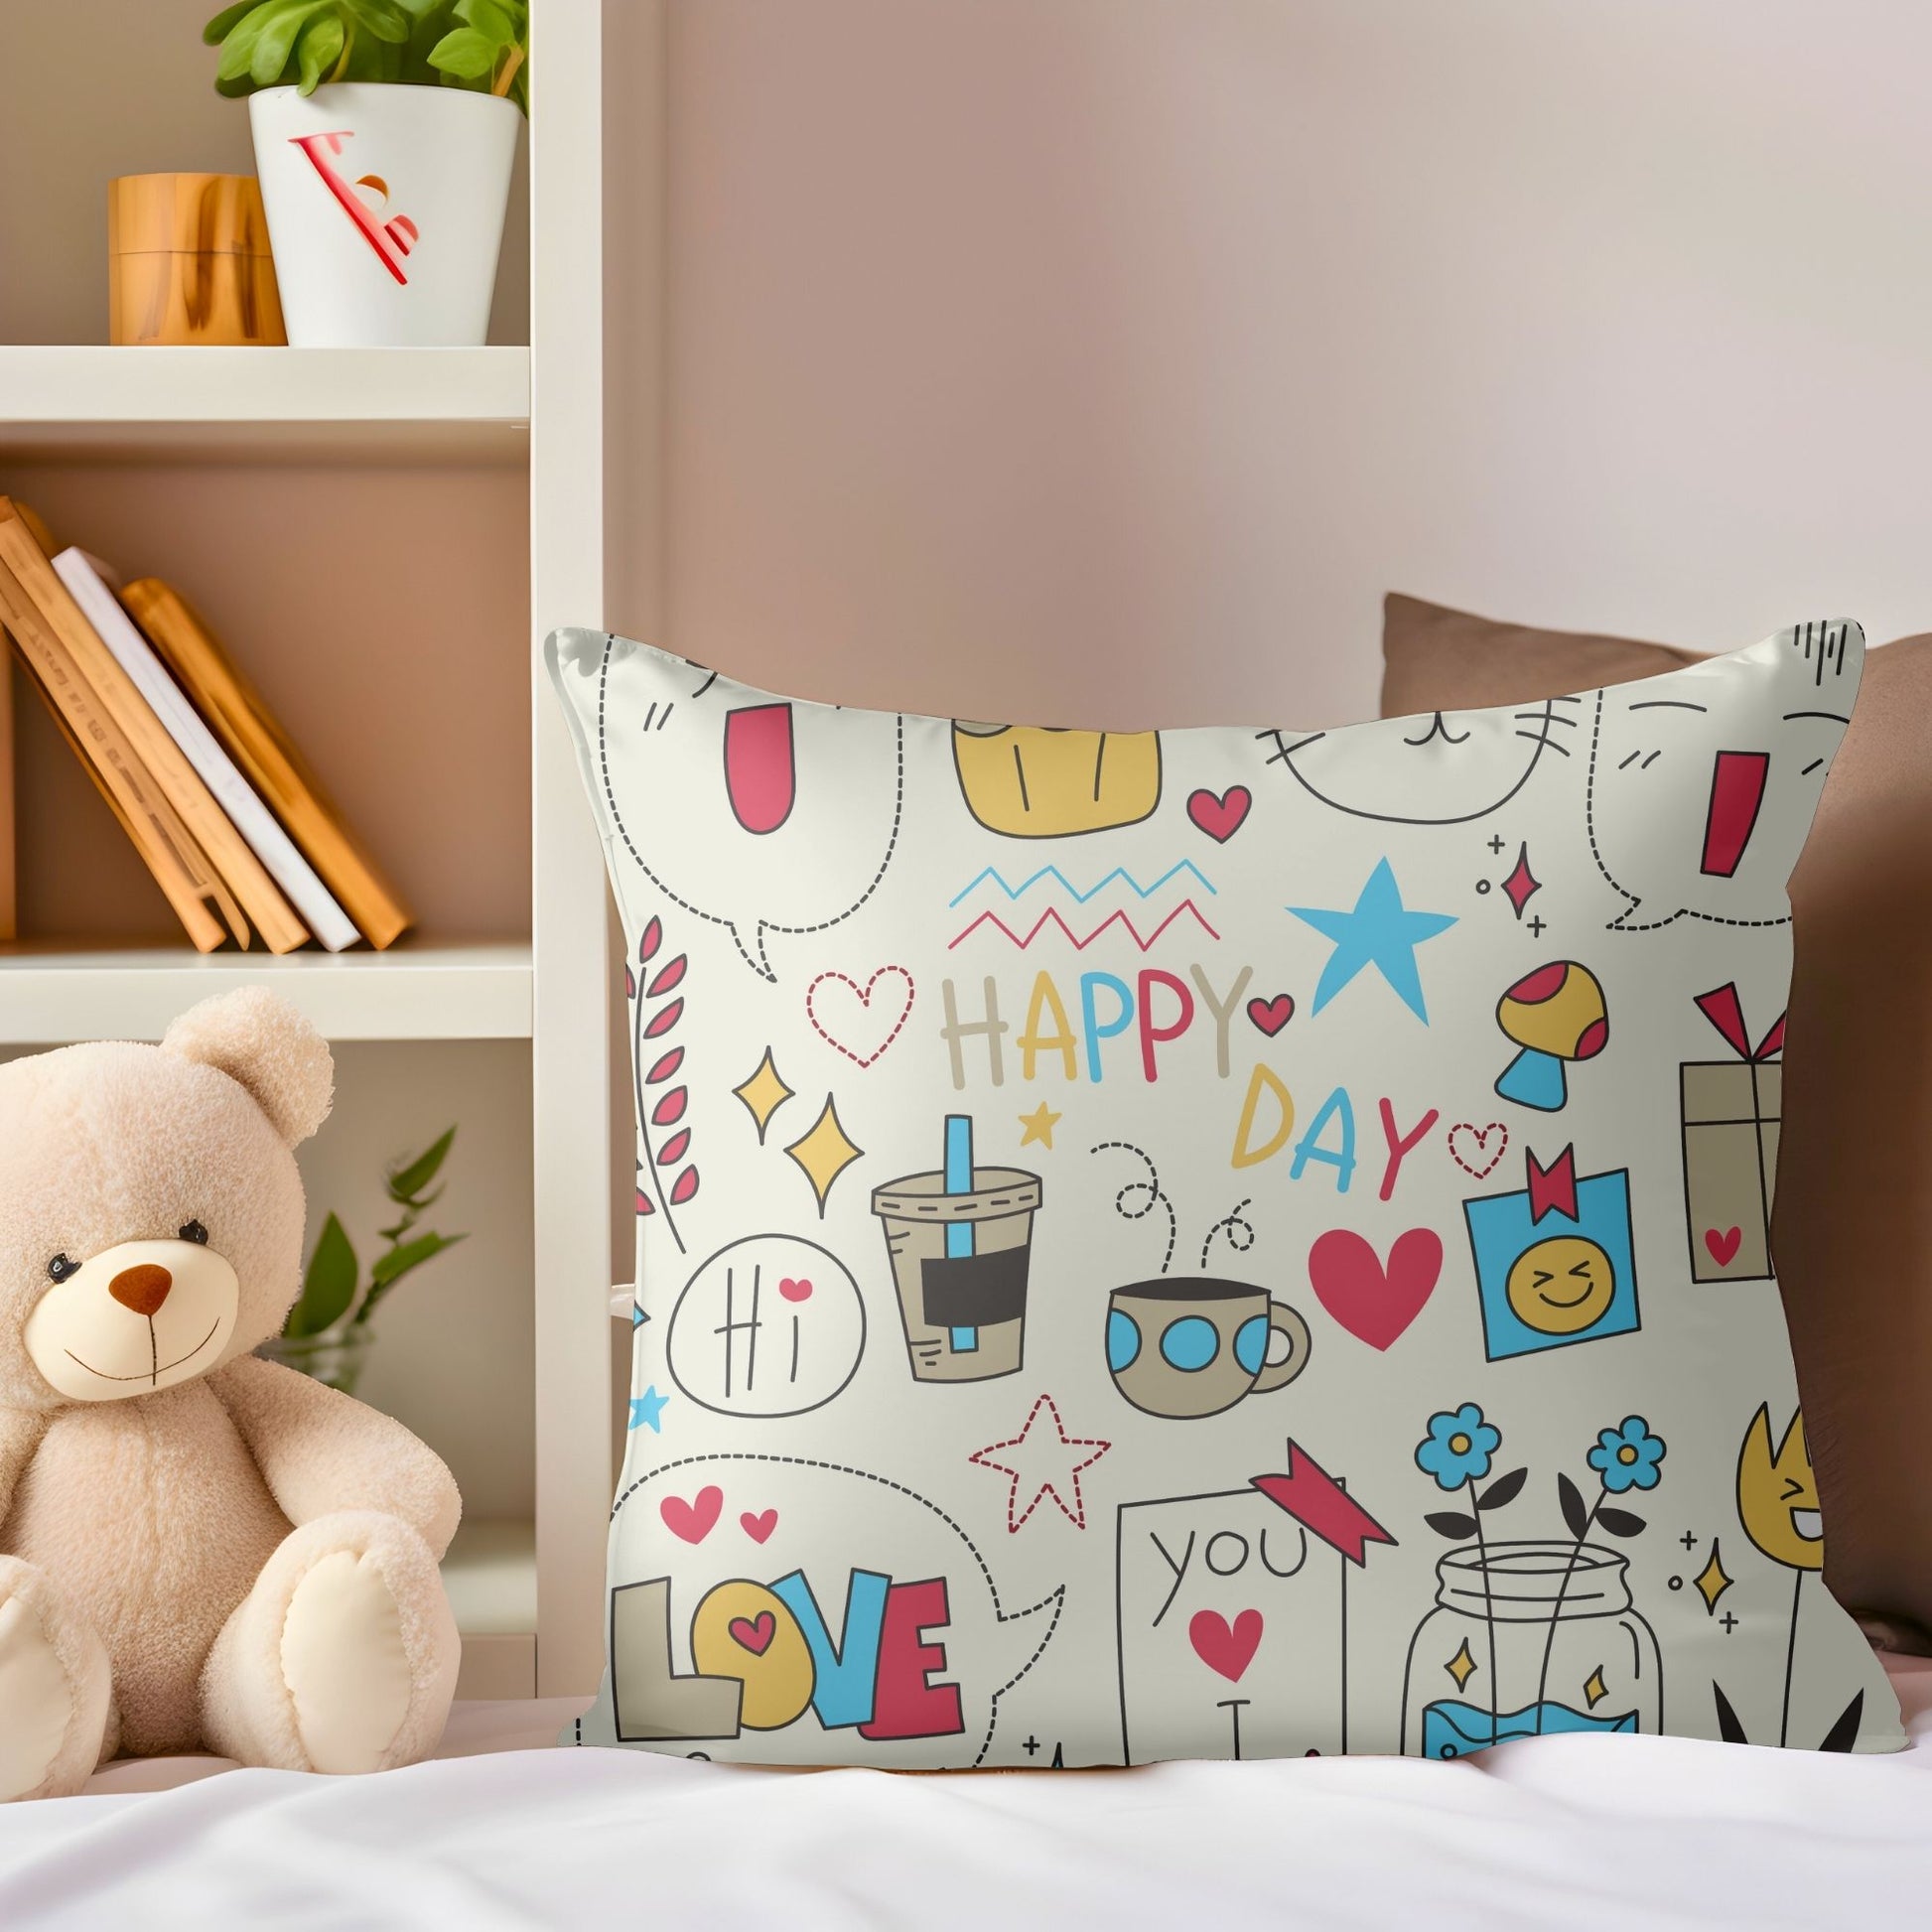 Soft pillow adorned with a "Happy Day" motif for children's rooms.